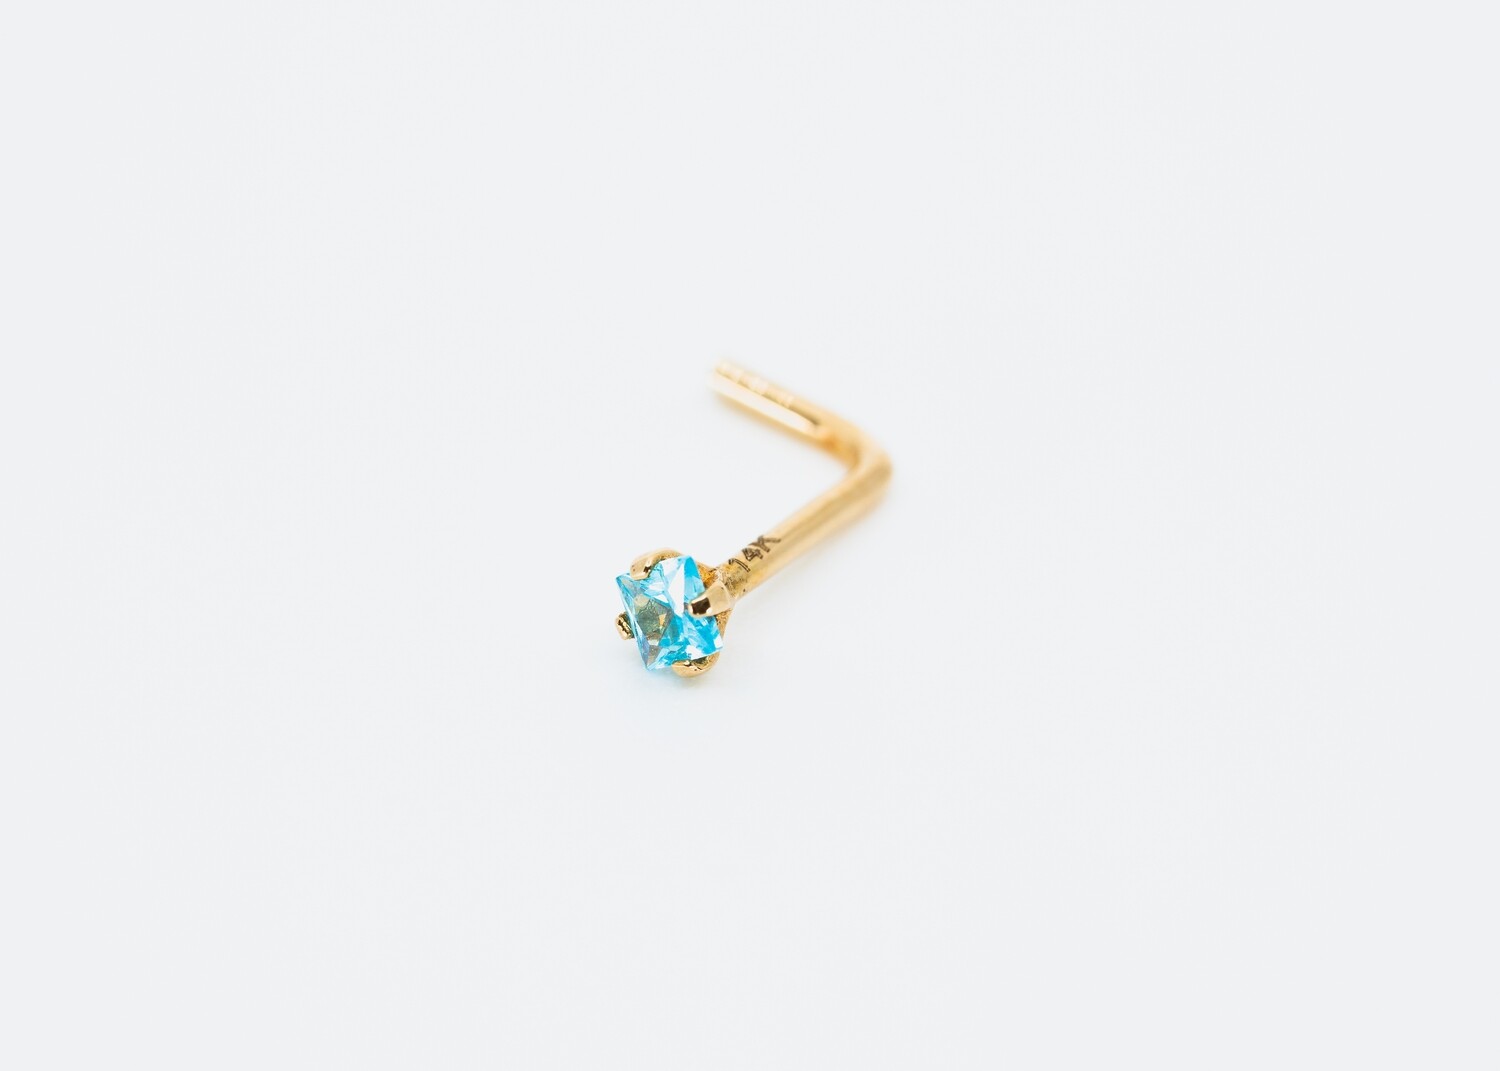 14kt. Gold Nose Piercing with an Ocean Blue crystal CZ mark 14k Solid Gold New